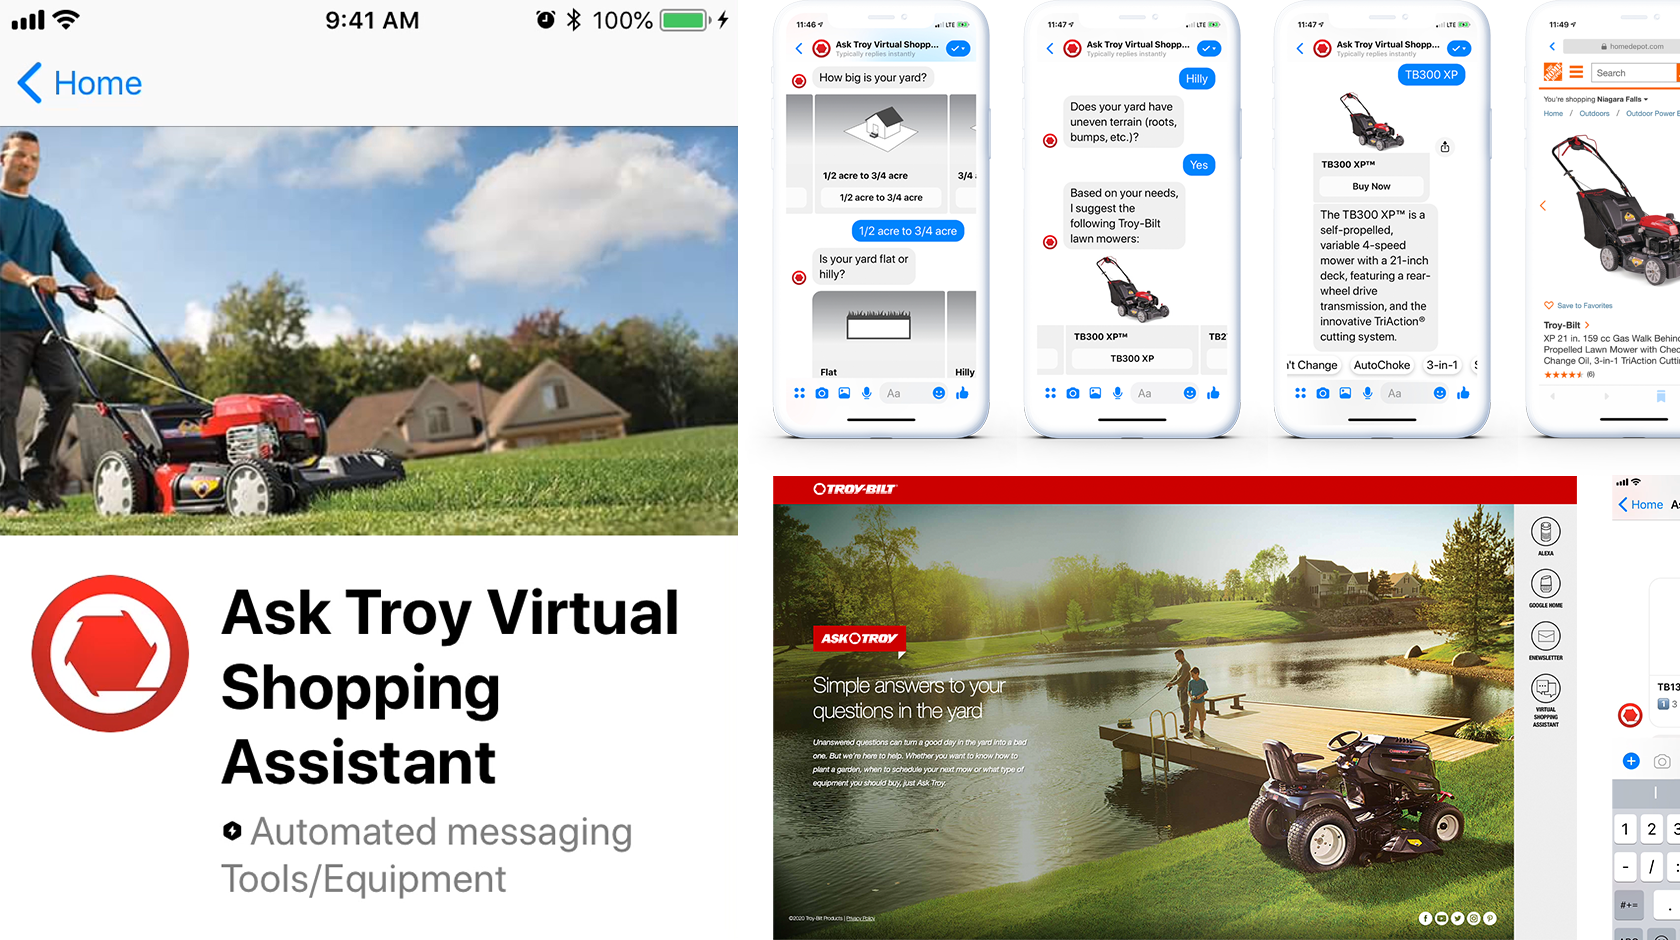 Ask Troy Virtual Assistant - Messenger and website screenshots